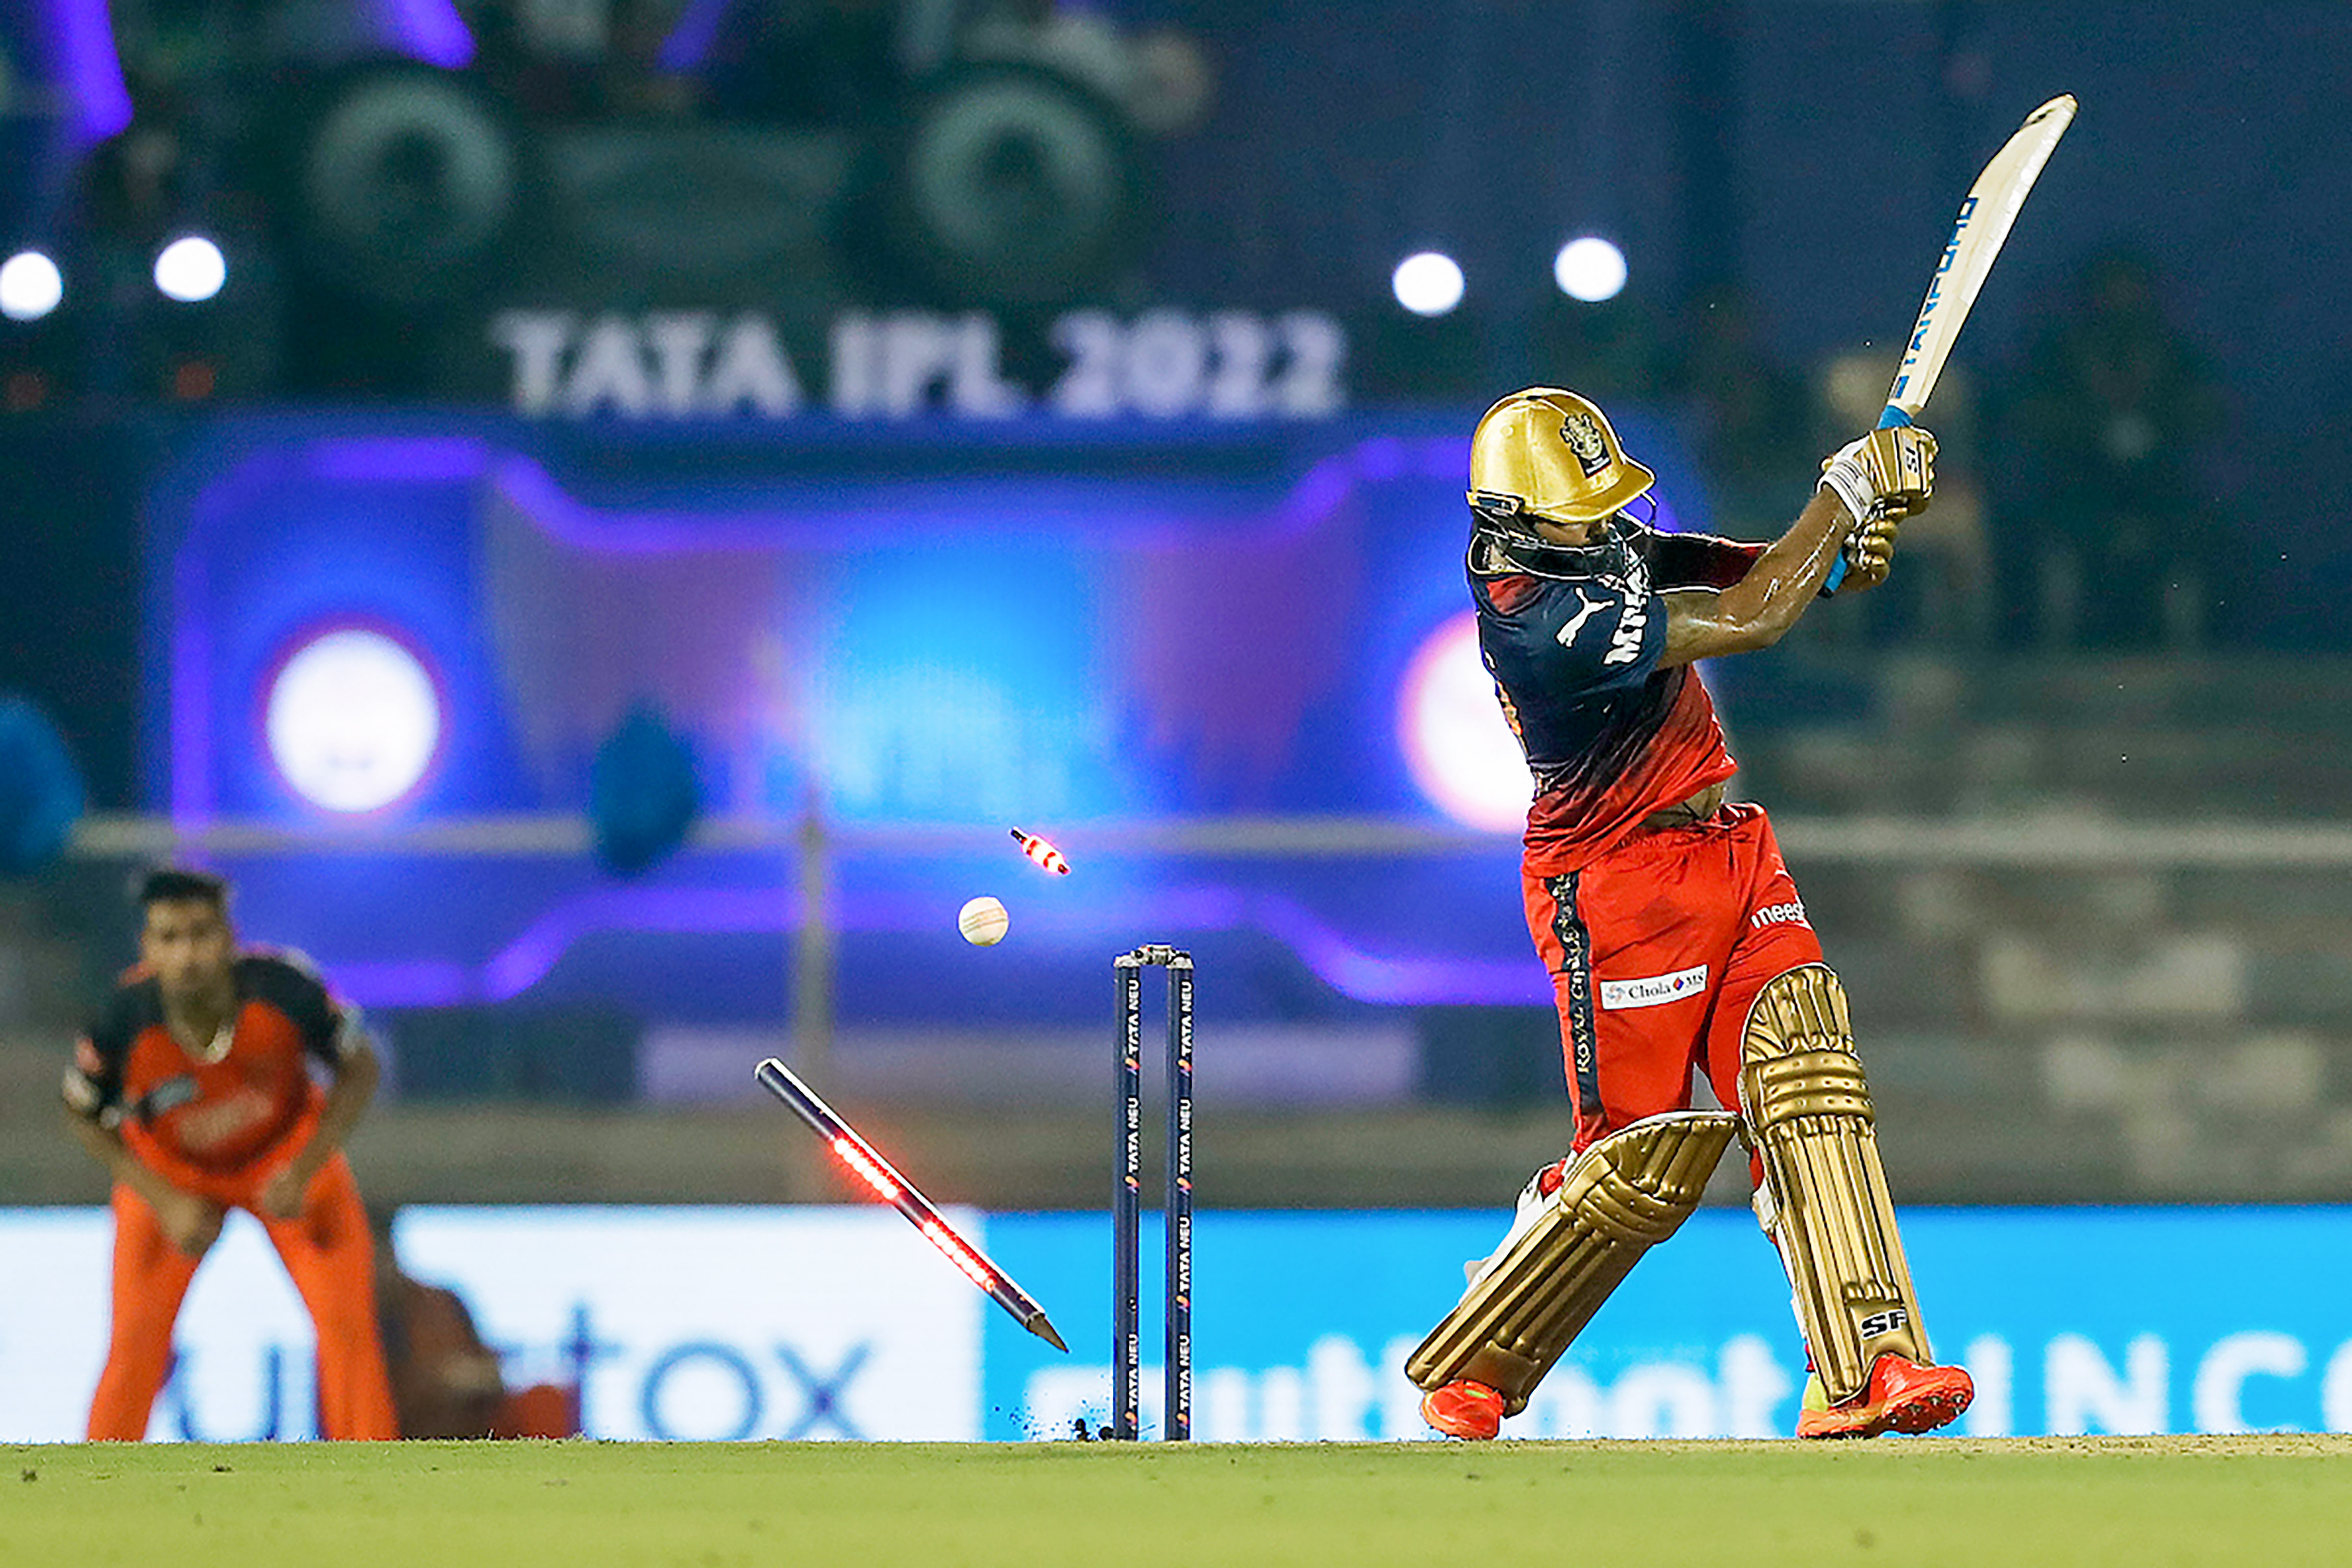 IPL 2022: Sunrisers Hyderabad beat Royal Challengers Bangalore by 9 wickets